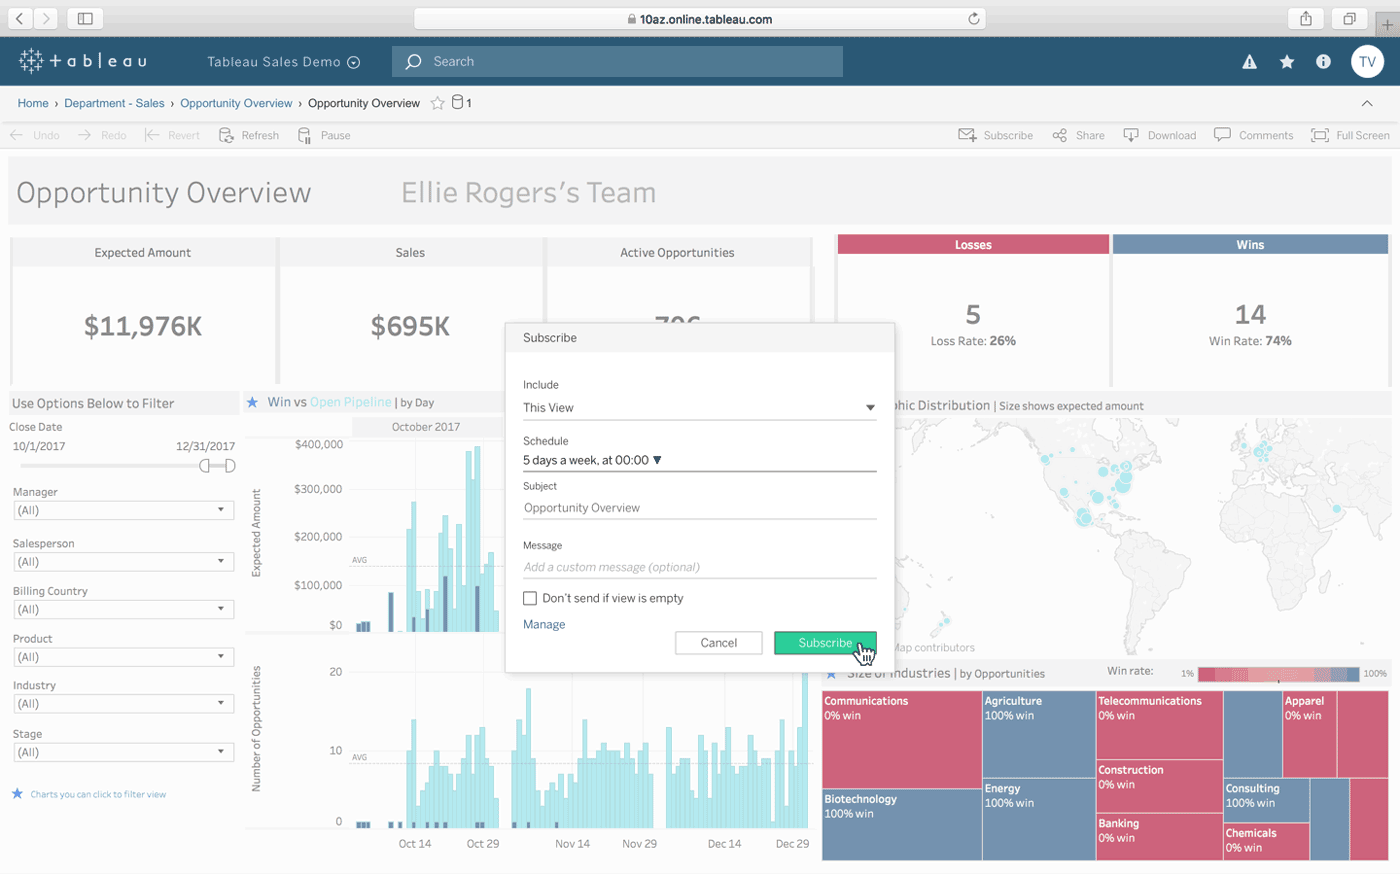 tableau viewer account signs up for subscription alerts